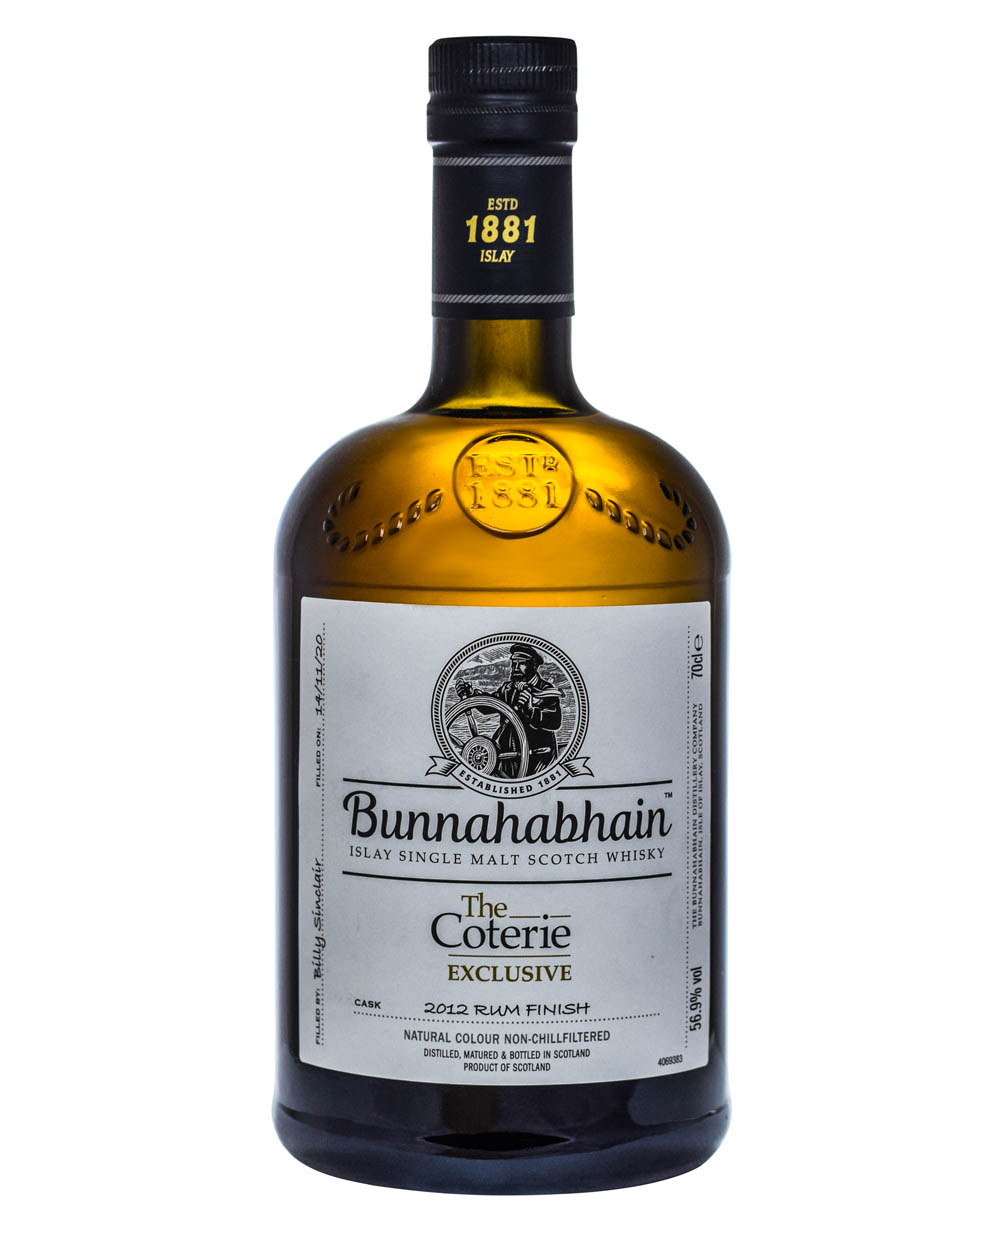 Bunnahabhain The Coterie Exclusive 2012 Rum Finish Musthave Malts MHM